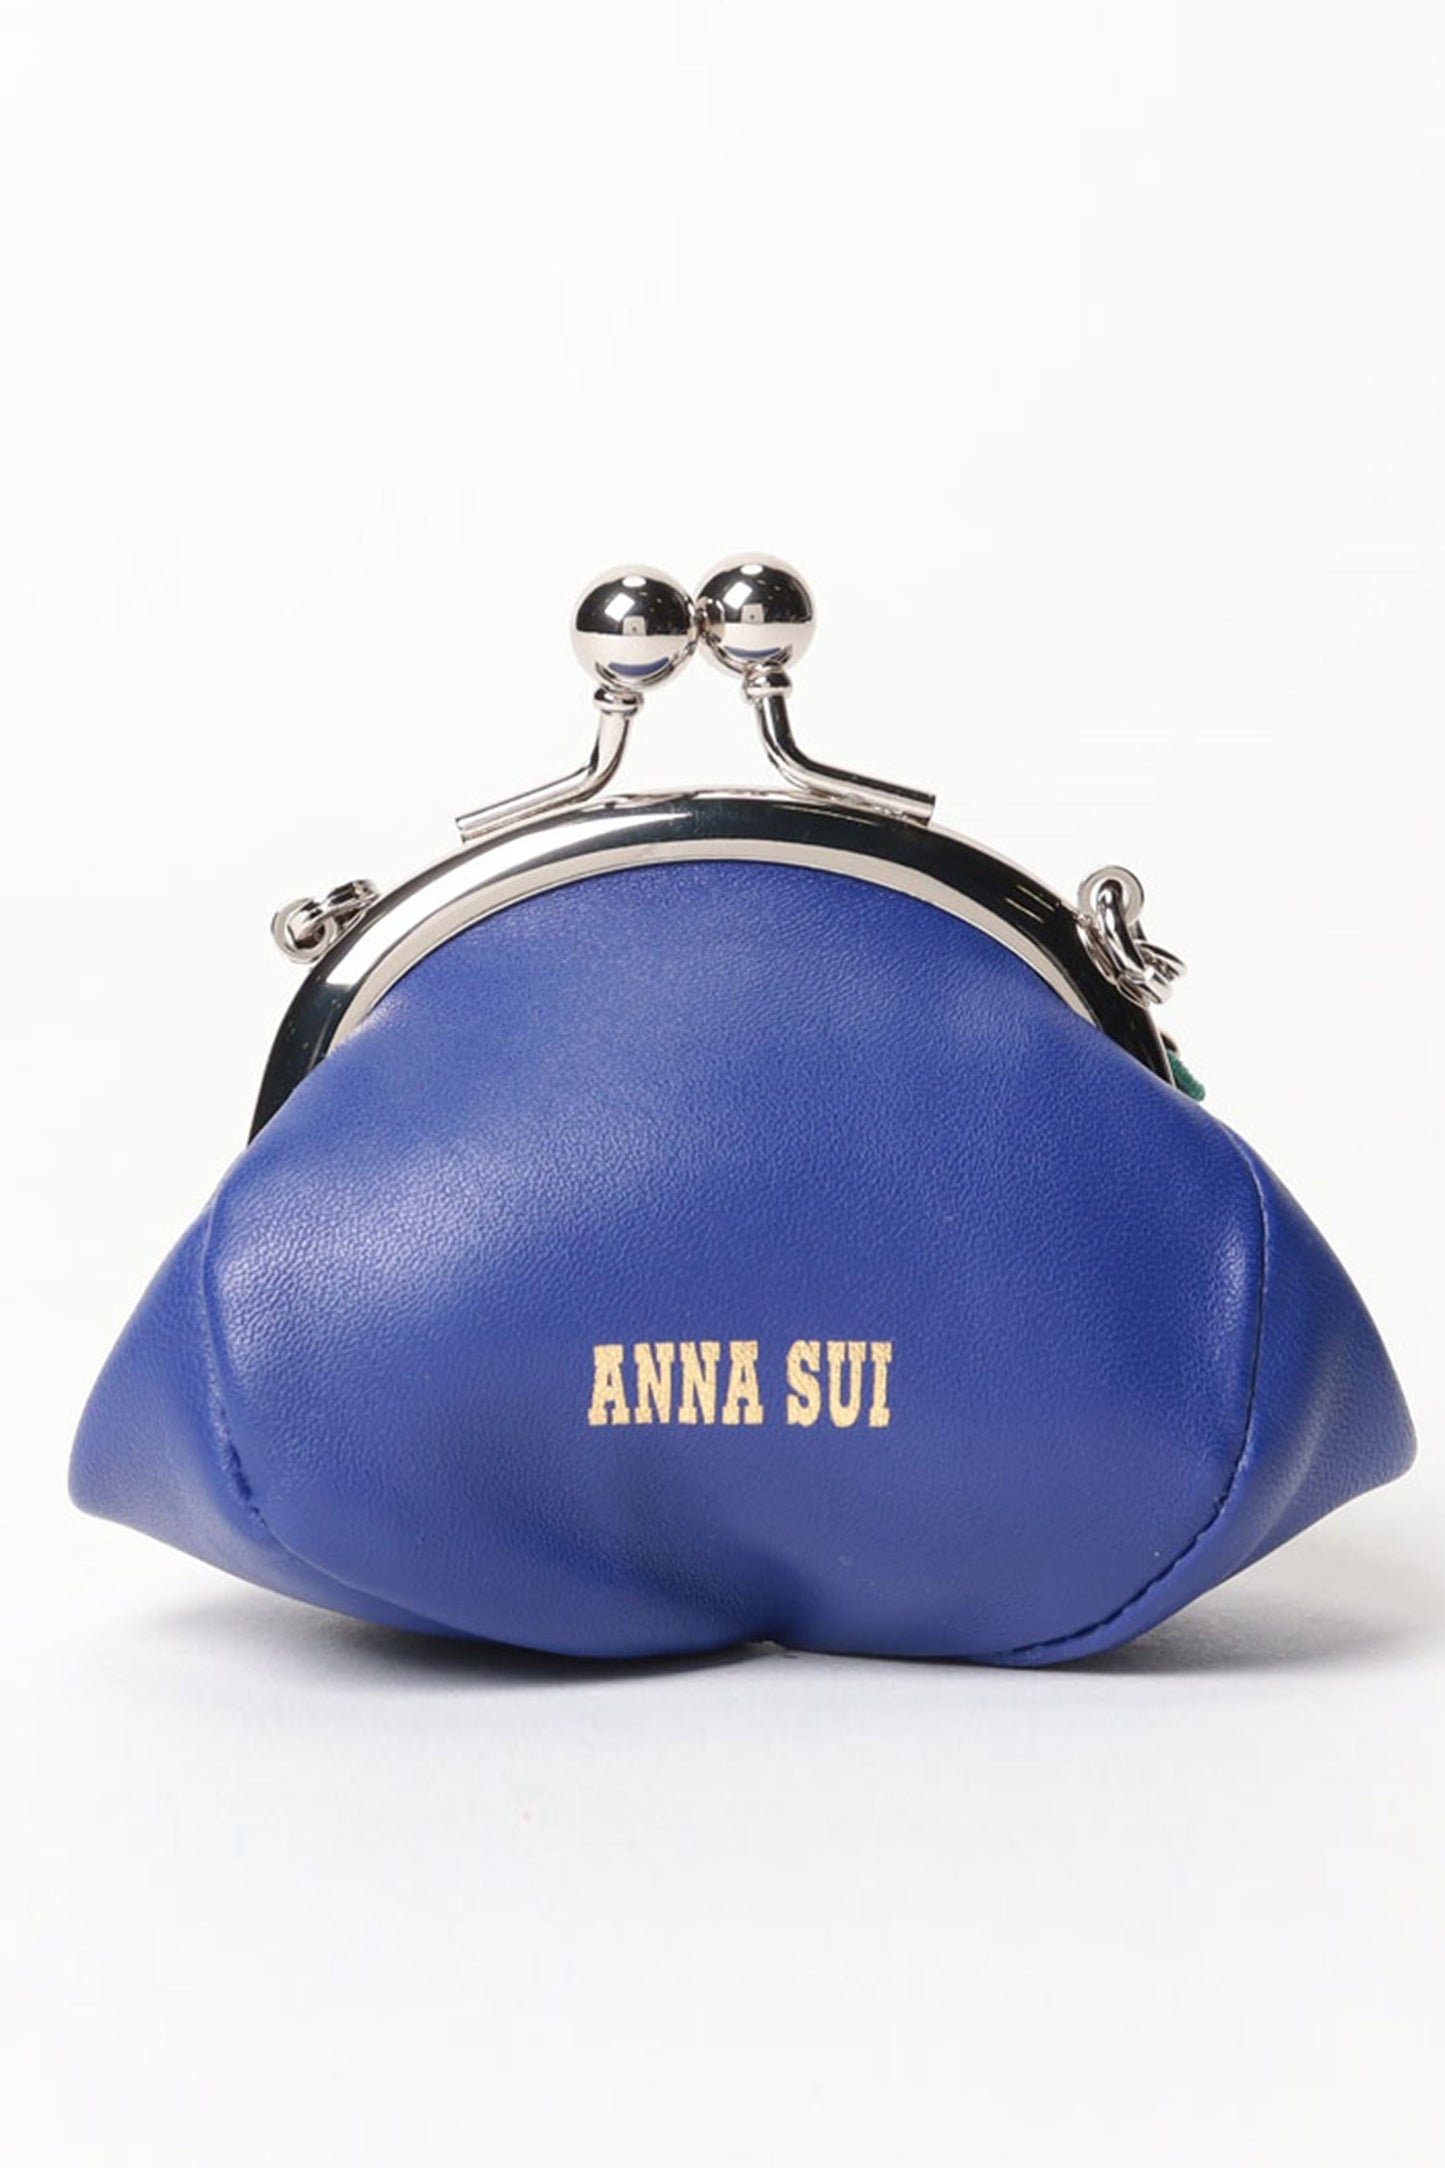 Candy Charm Mini Purse Navy, silver chain, and big Clasp, Anna Sui logo in golden fonts